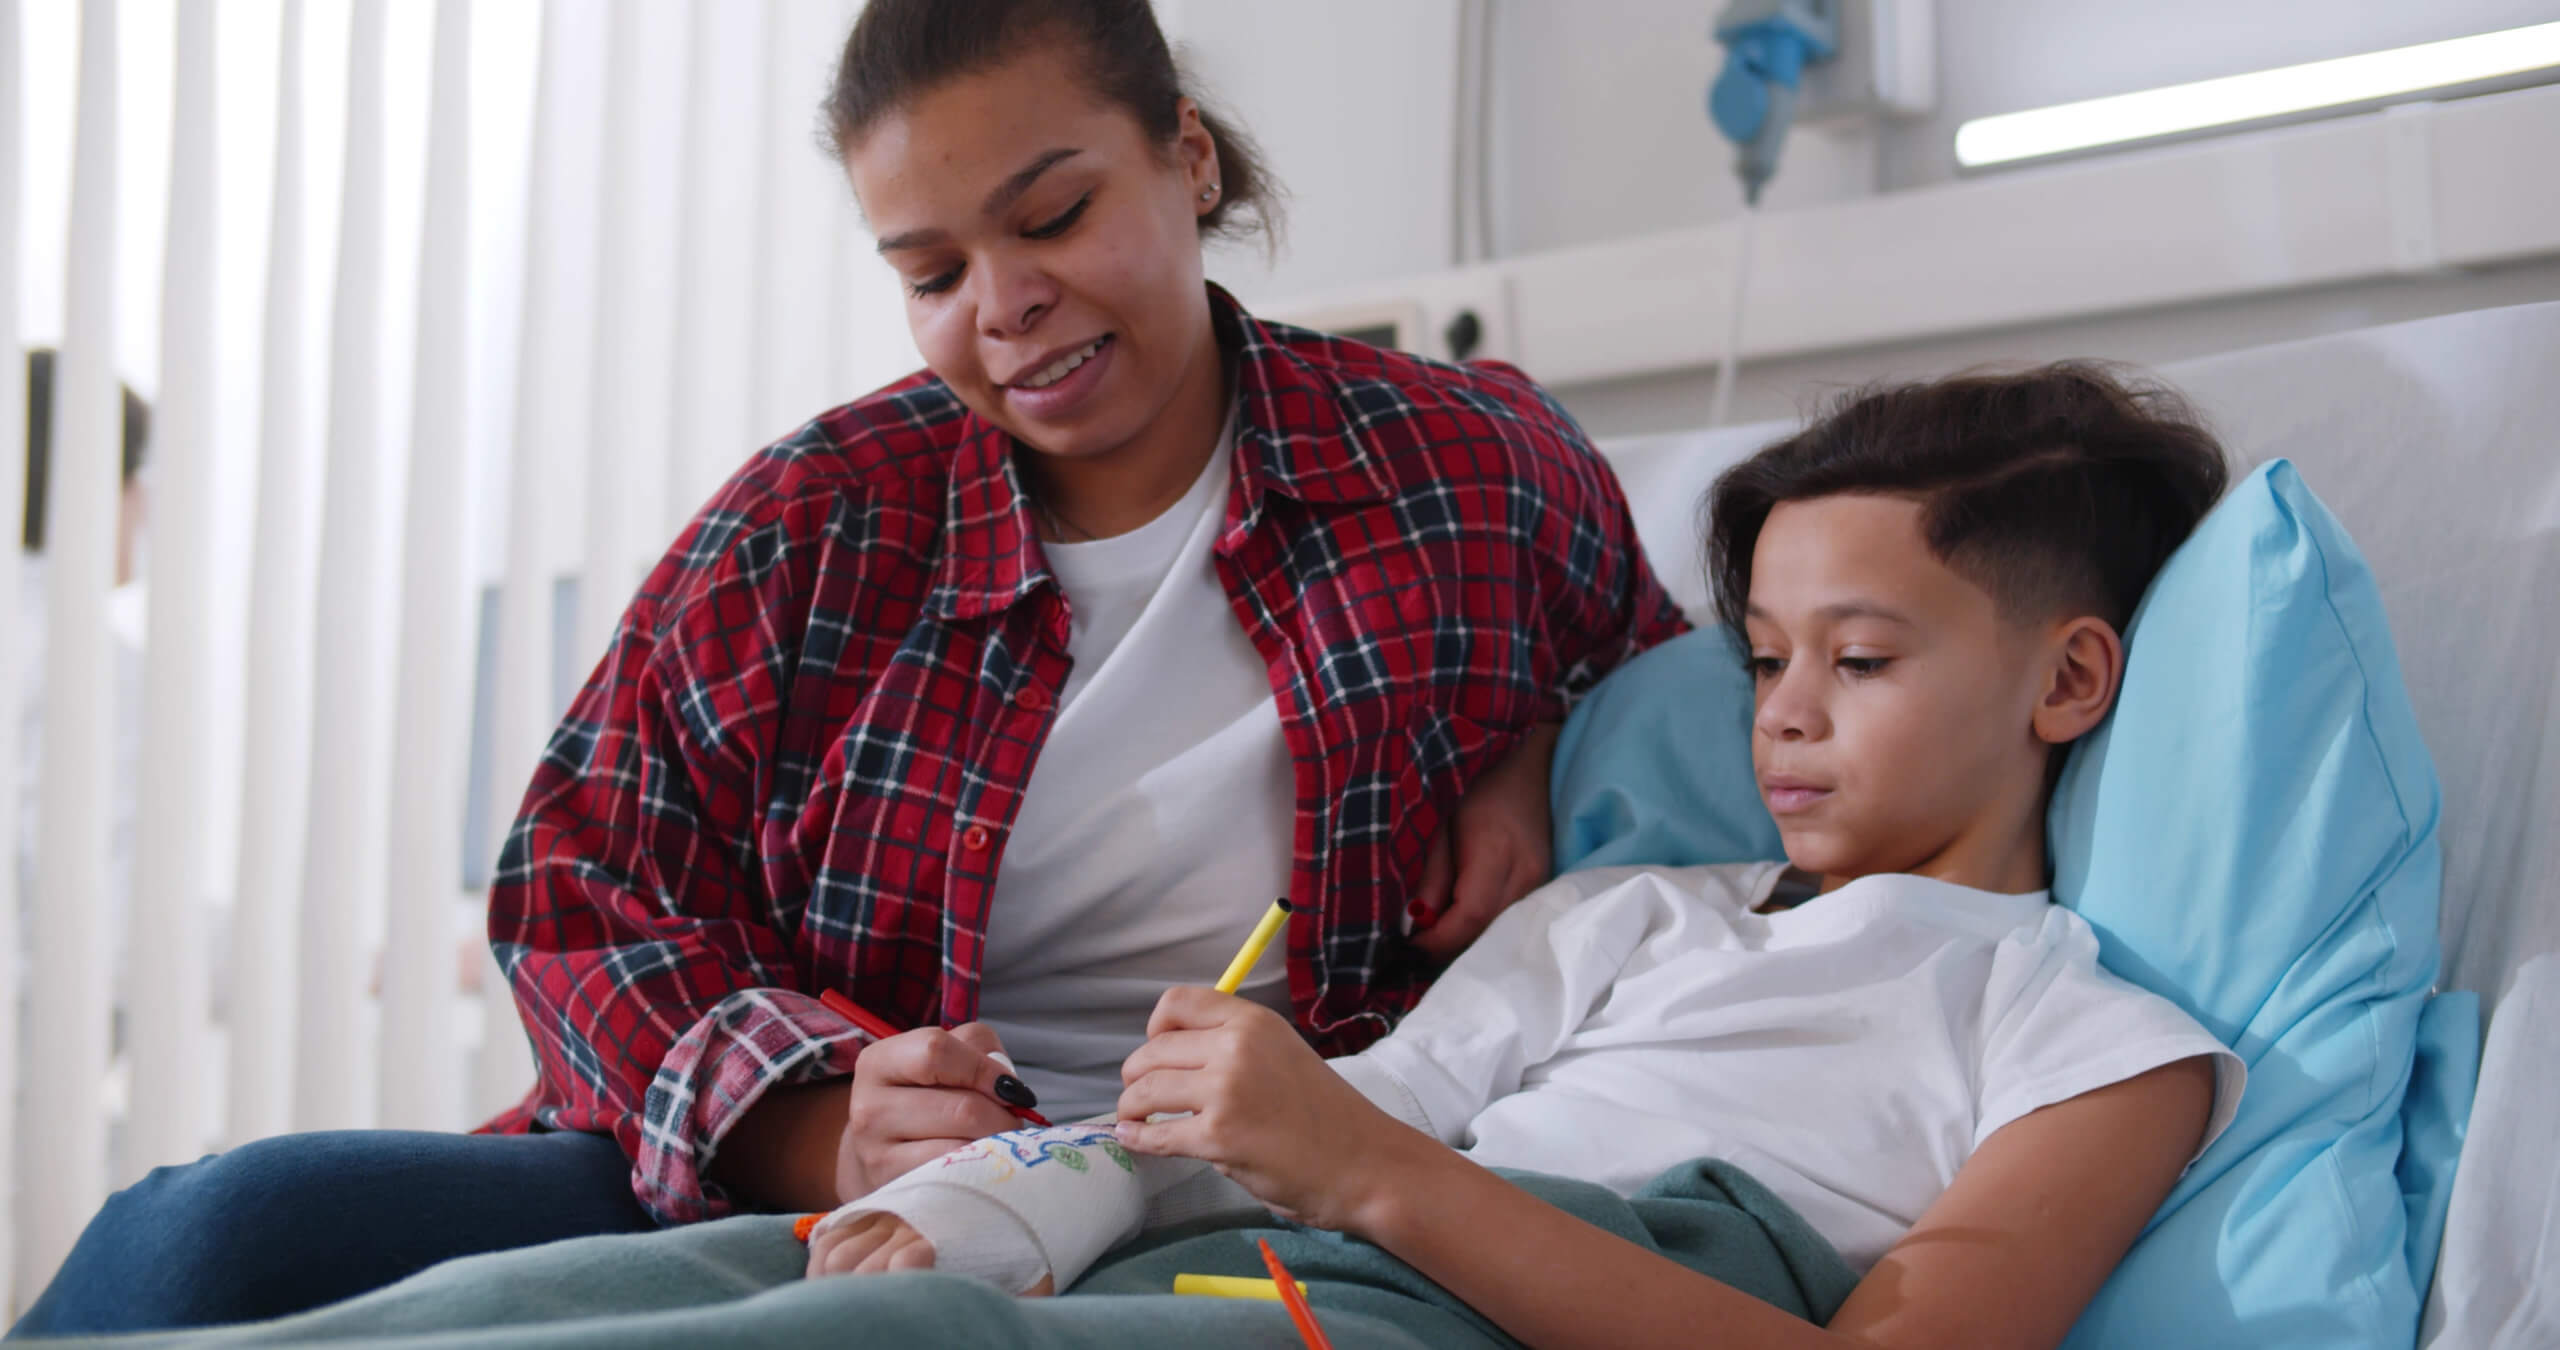 A woman sits next to a boy in a hospital bed as they draw on his cast.